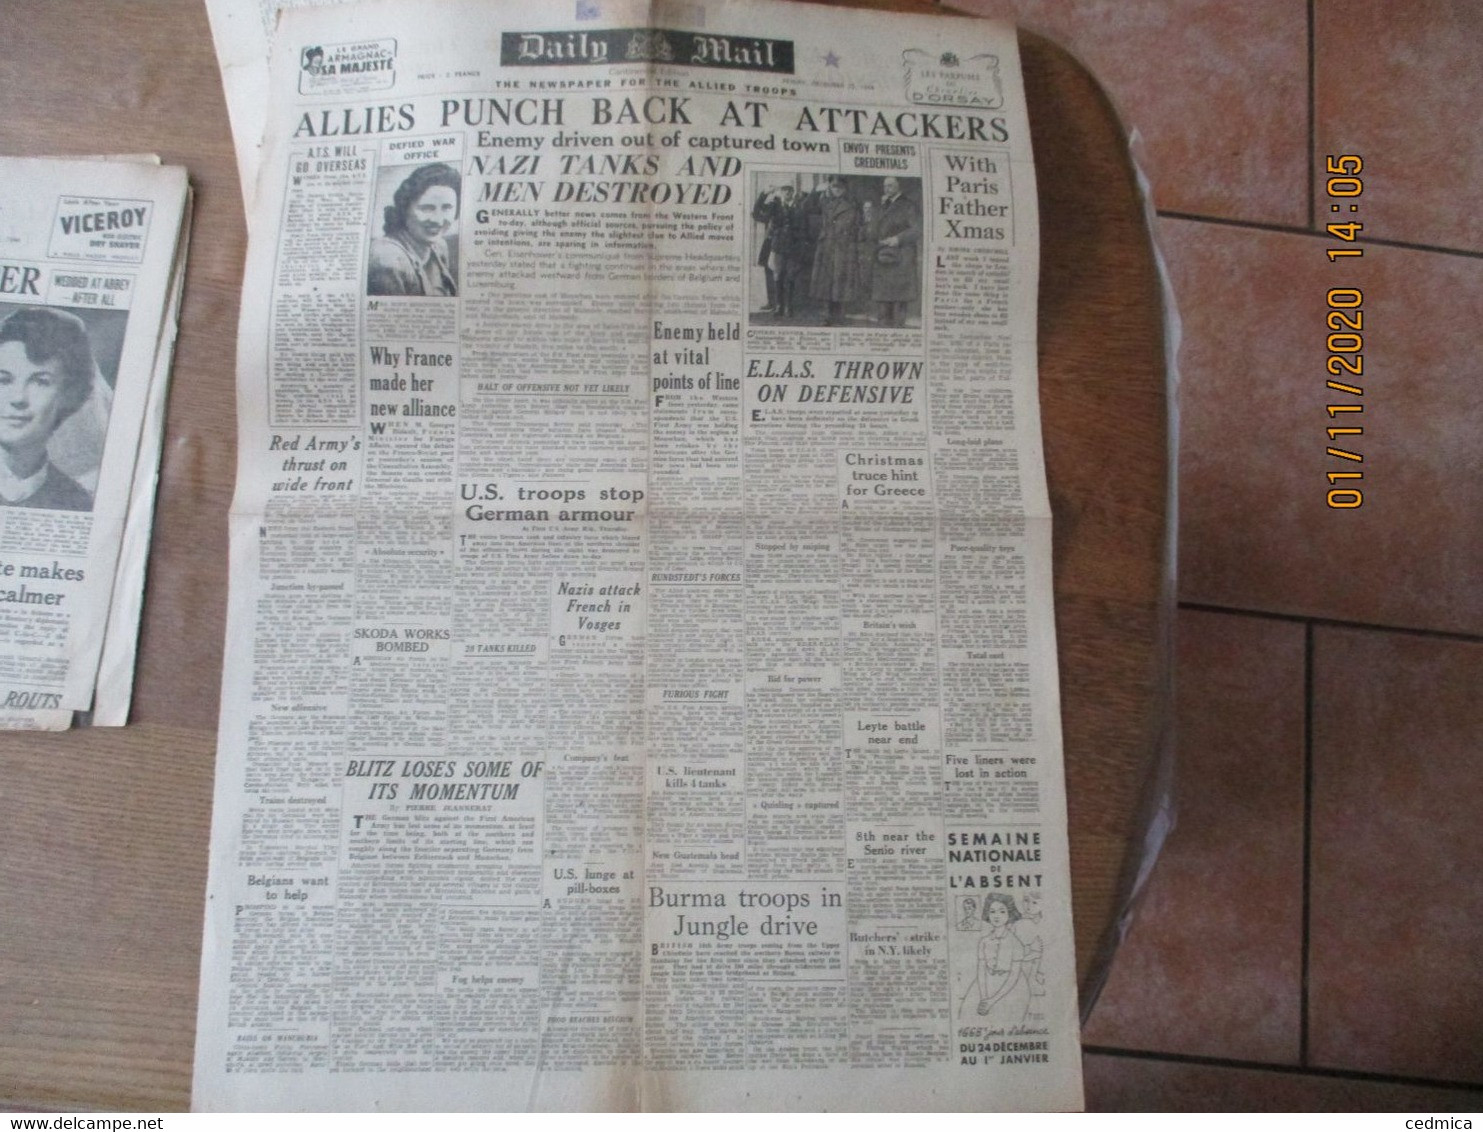 DAILY MAIL FRIDAY DECEMBER 22.1944 THE NEWSPAPER FOR THE ALLIED TROOPS - Oorlog 1939-45